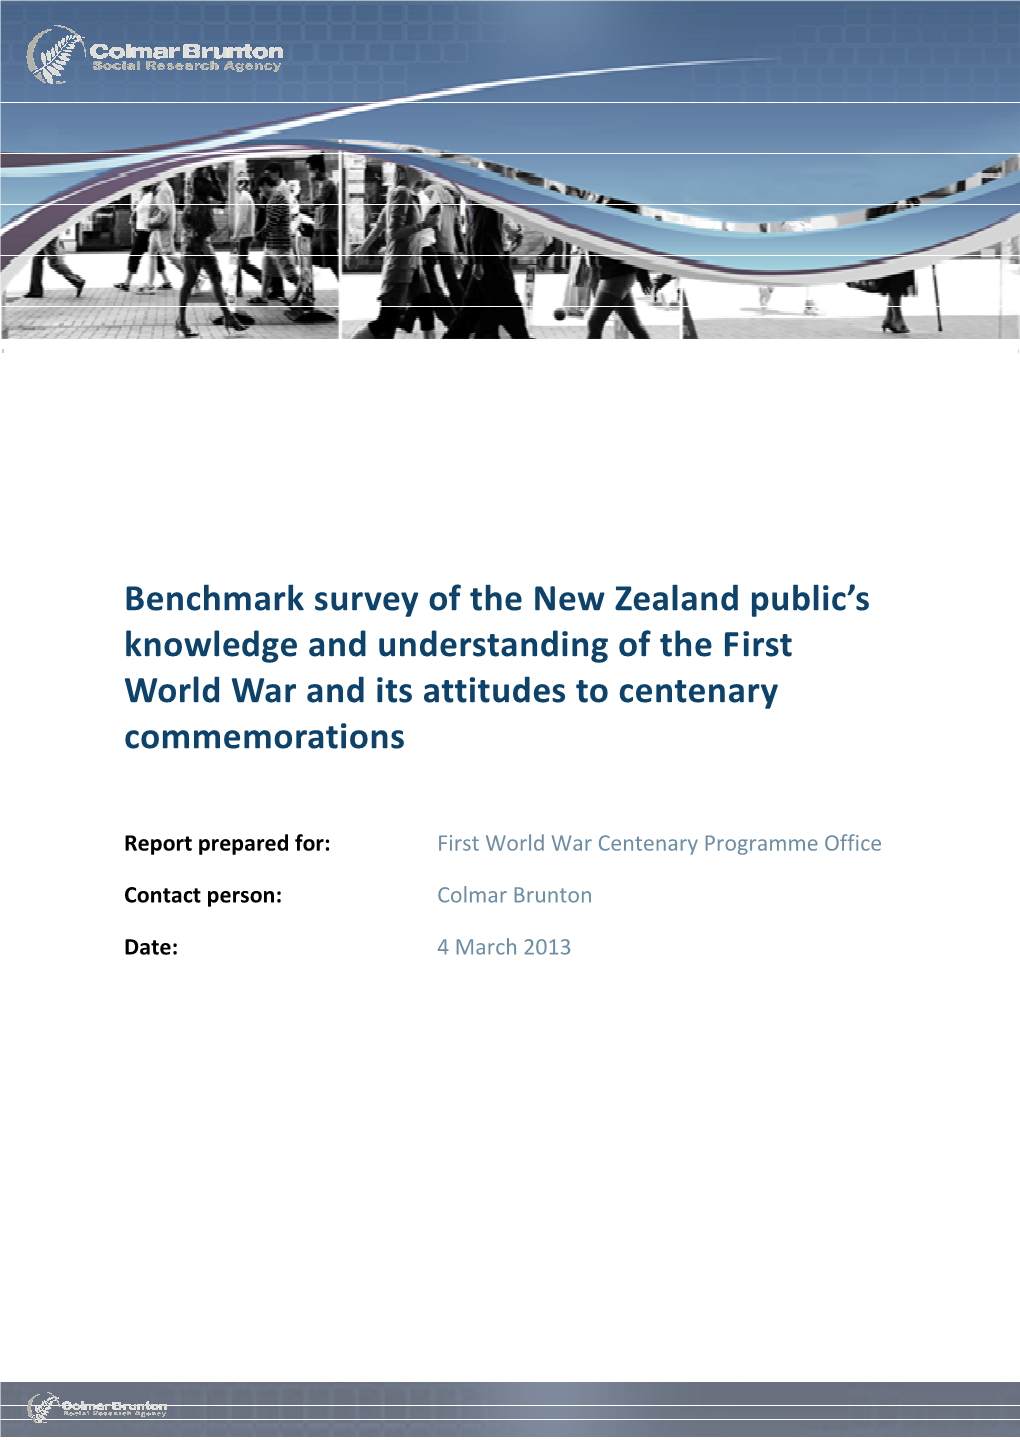 Benchmark Survey of the New Zealand Public's Knowledge And